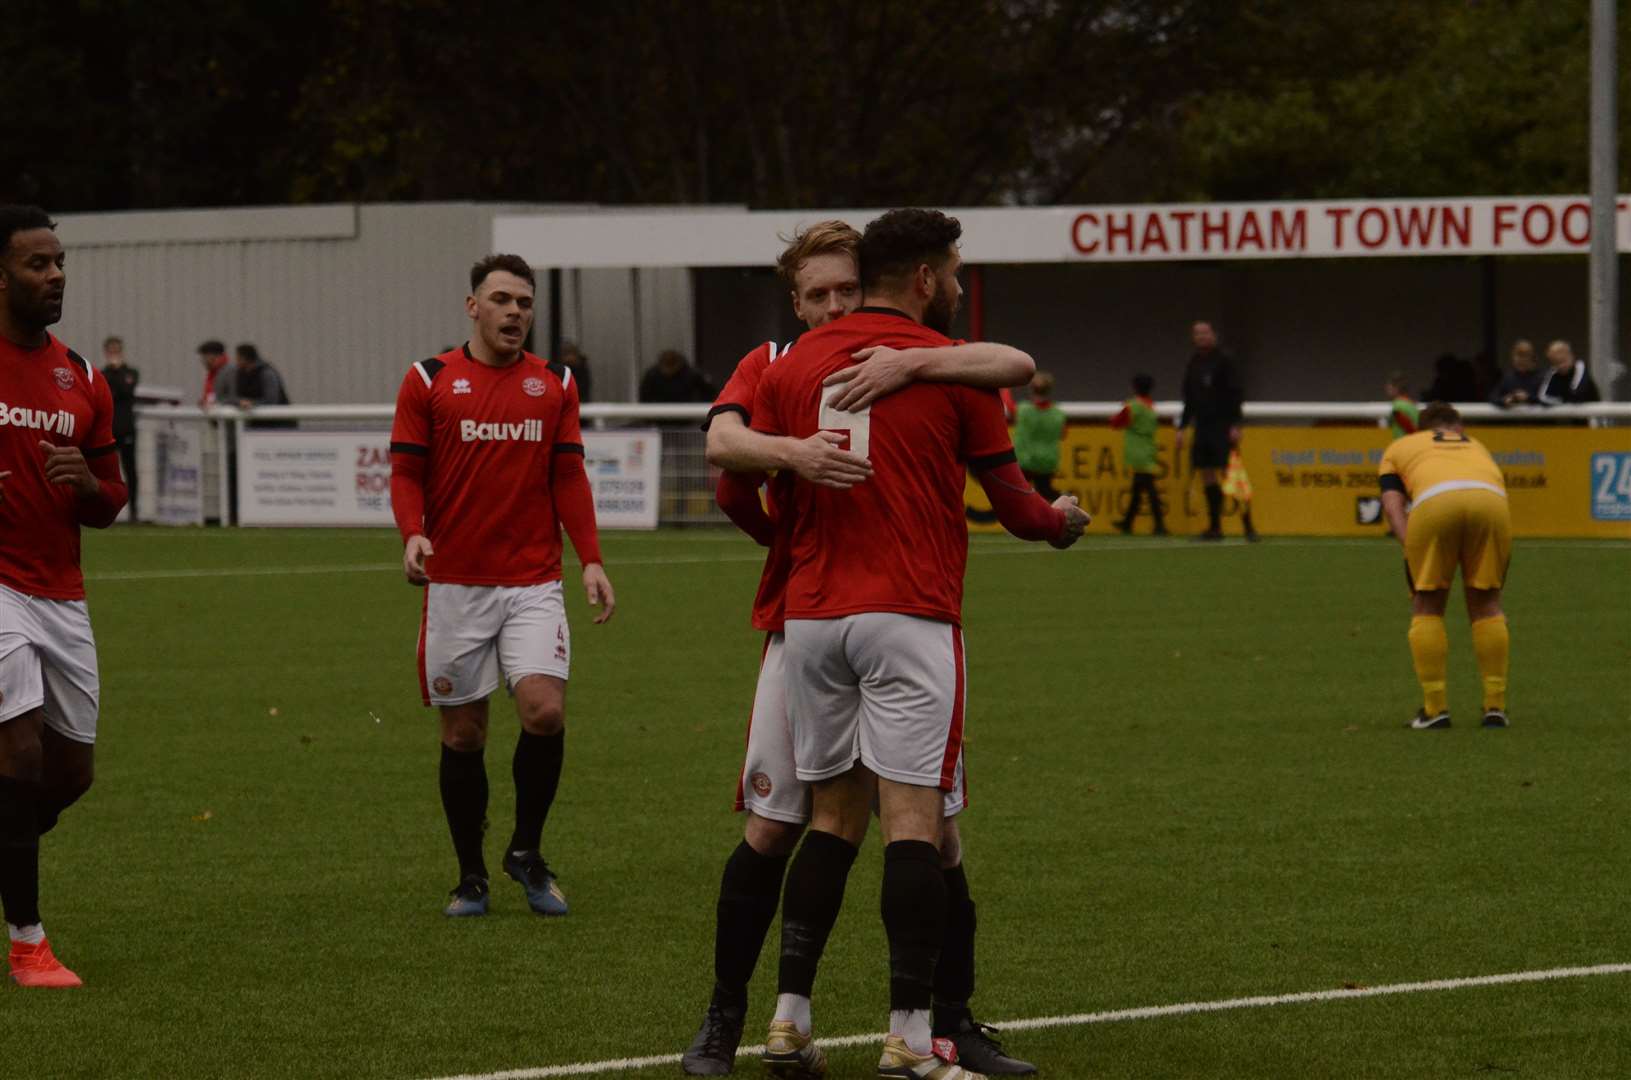 The football season is over for Chatham Town and they hope to help the community instead